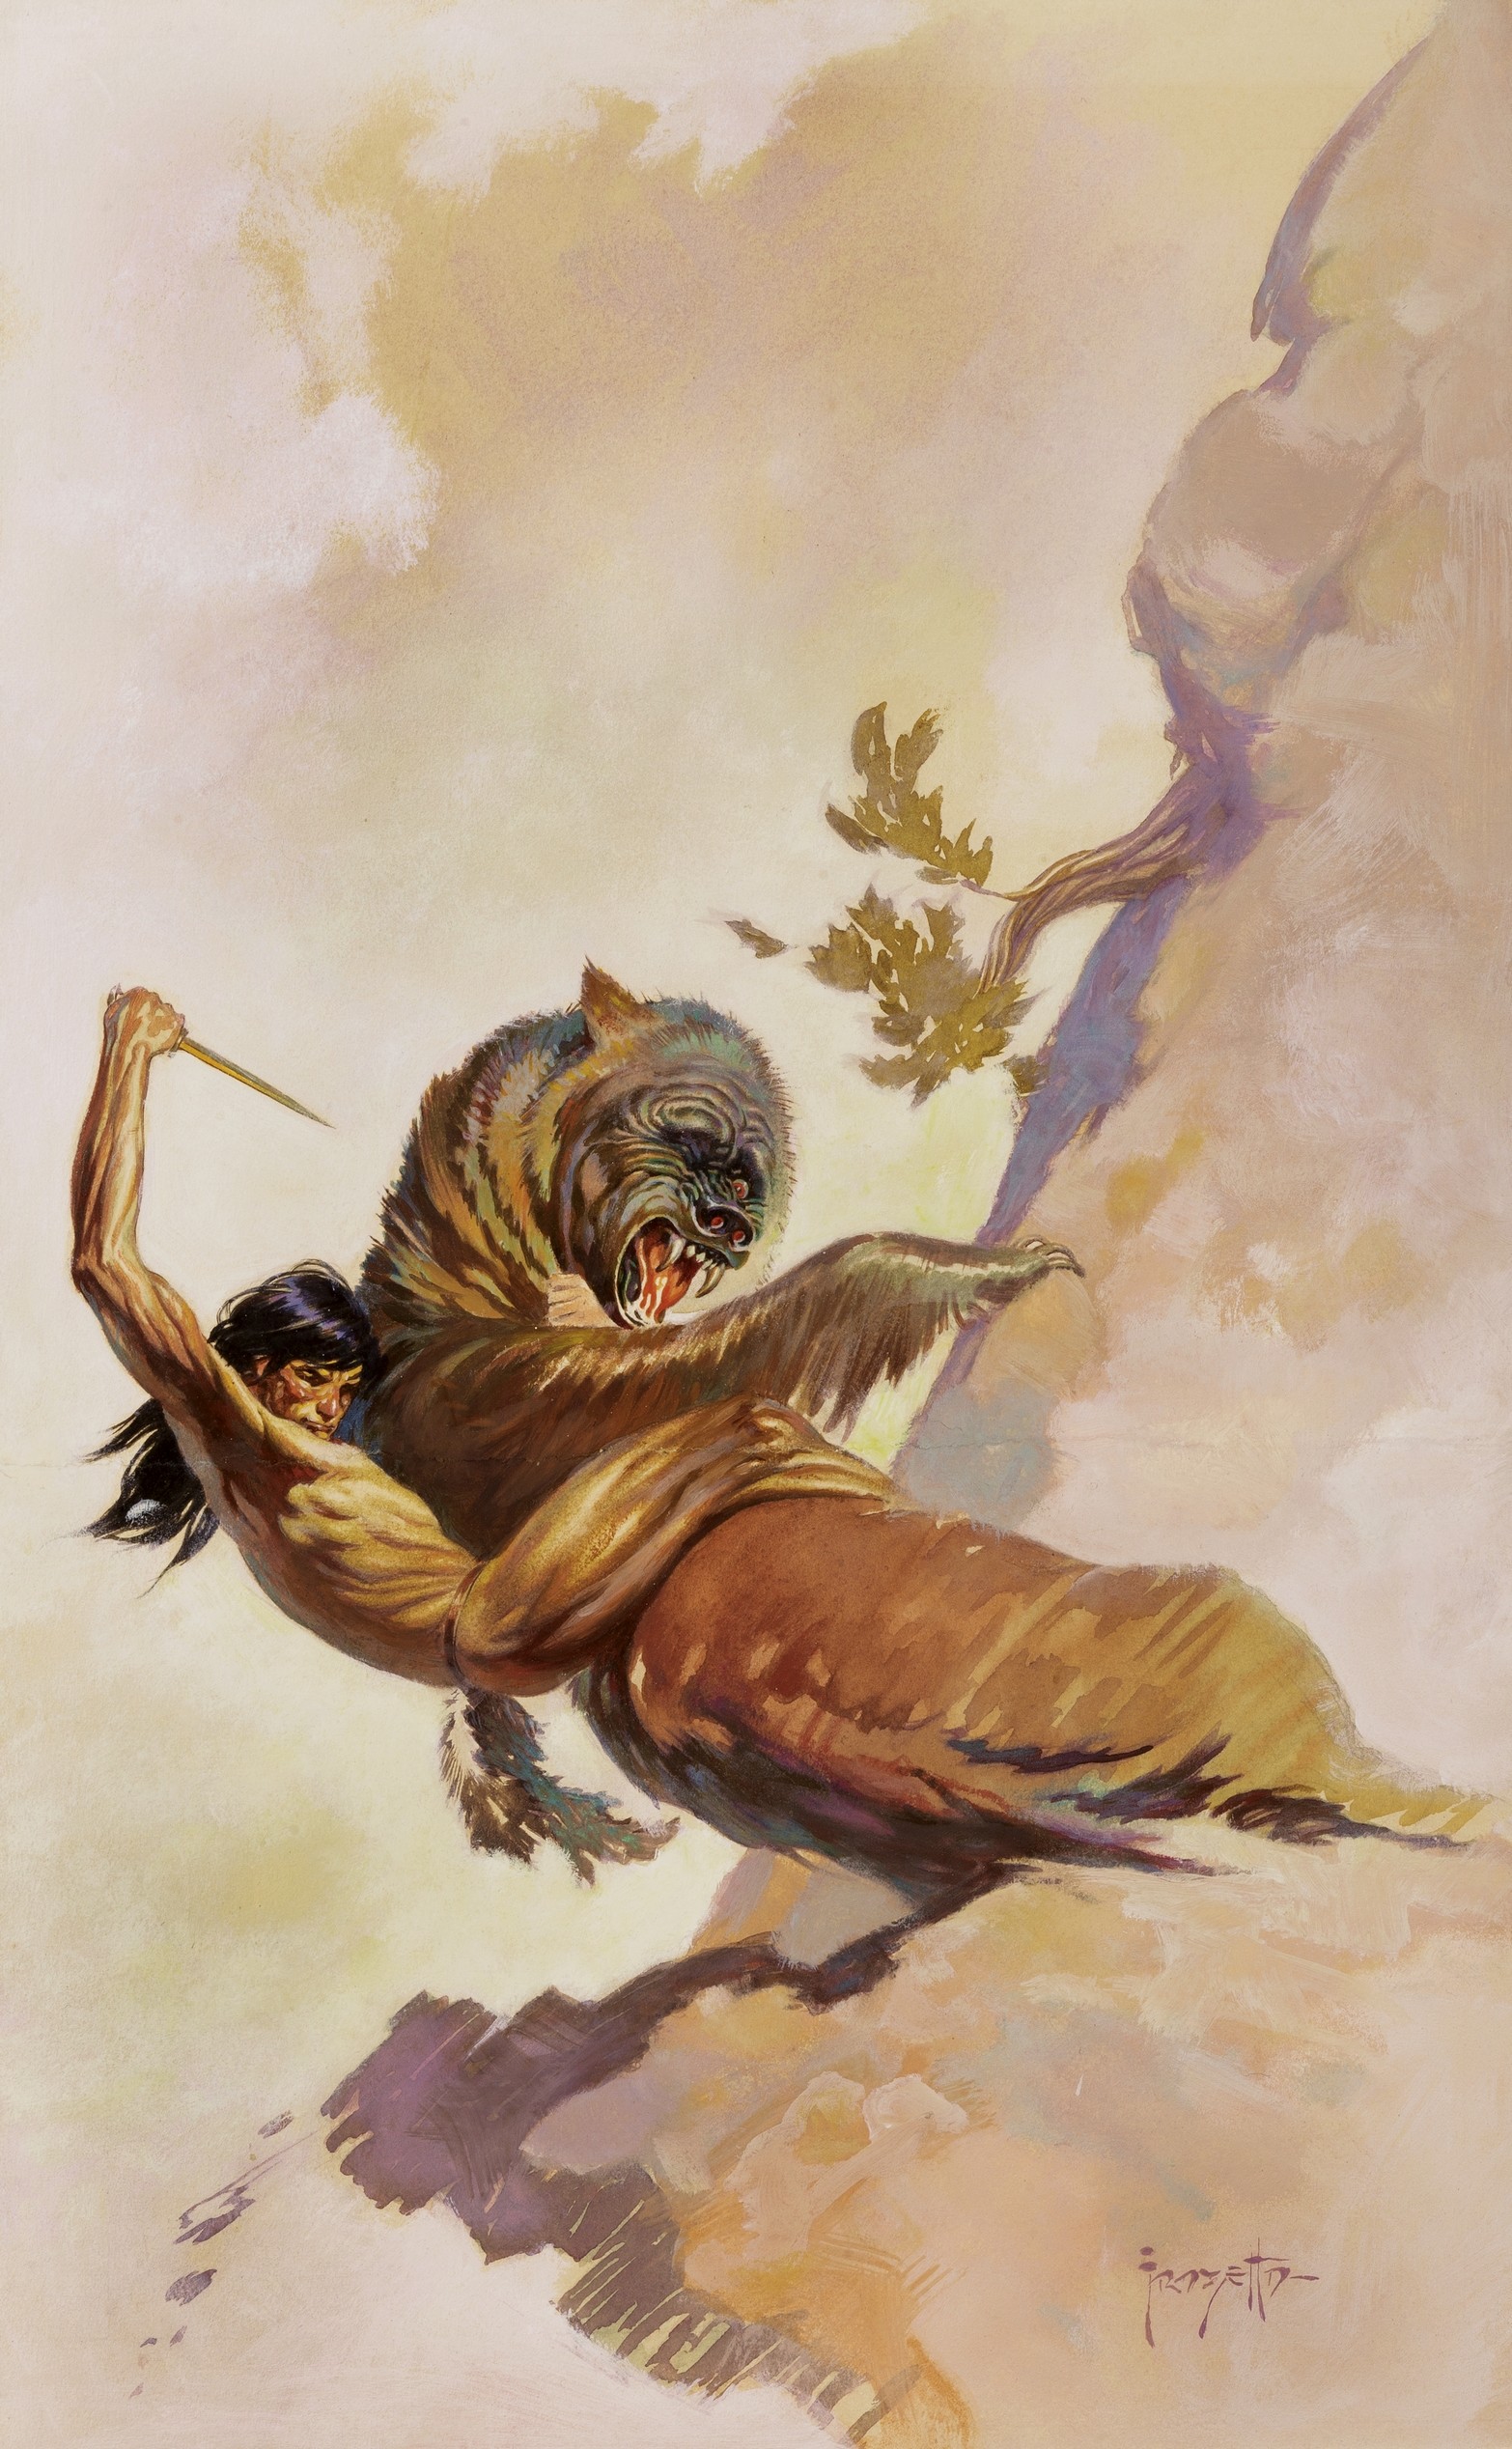 1566x2536 Get Ready To Appreciate The Fantasy Art of Frank Frazetta on a Whole New  Level!